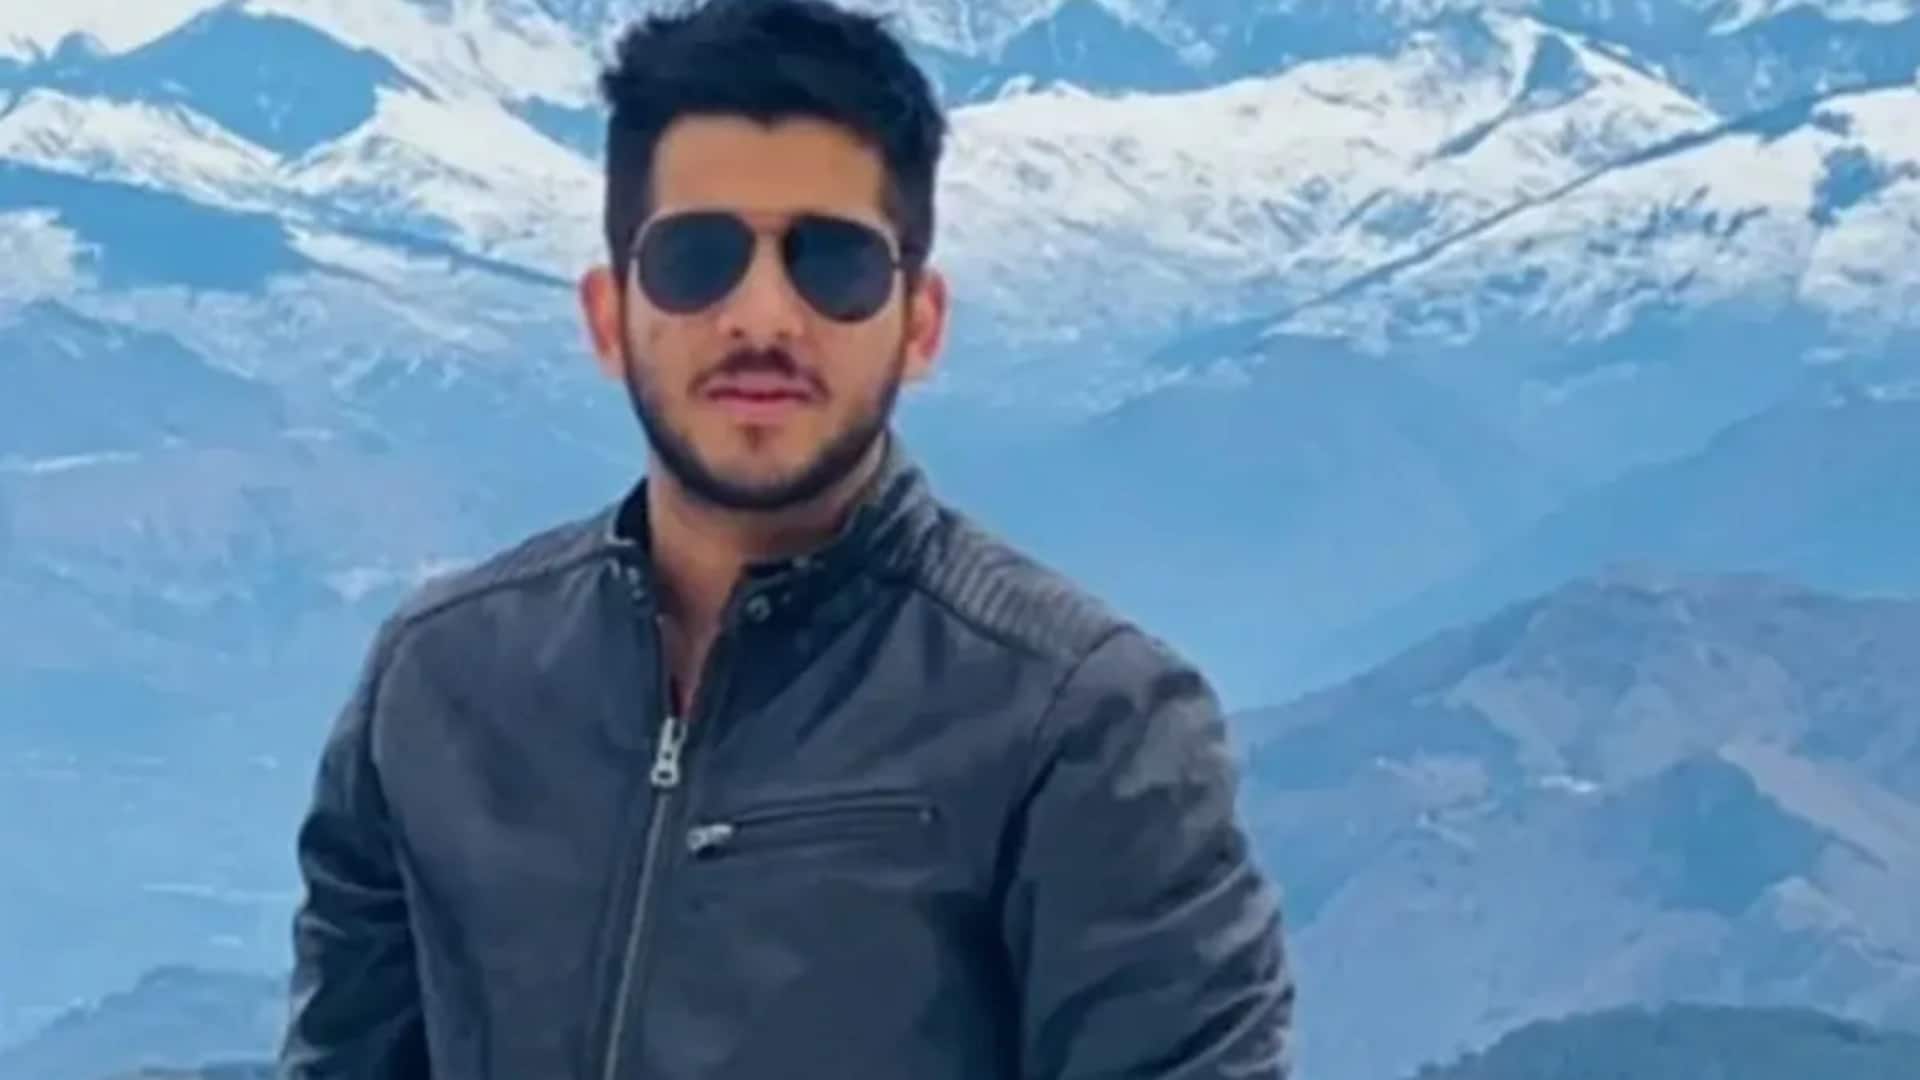 Indian student shot dead in Vancouver, Canada